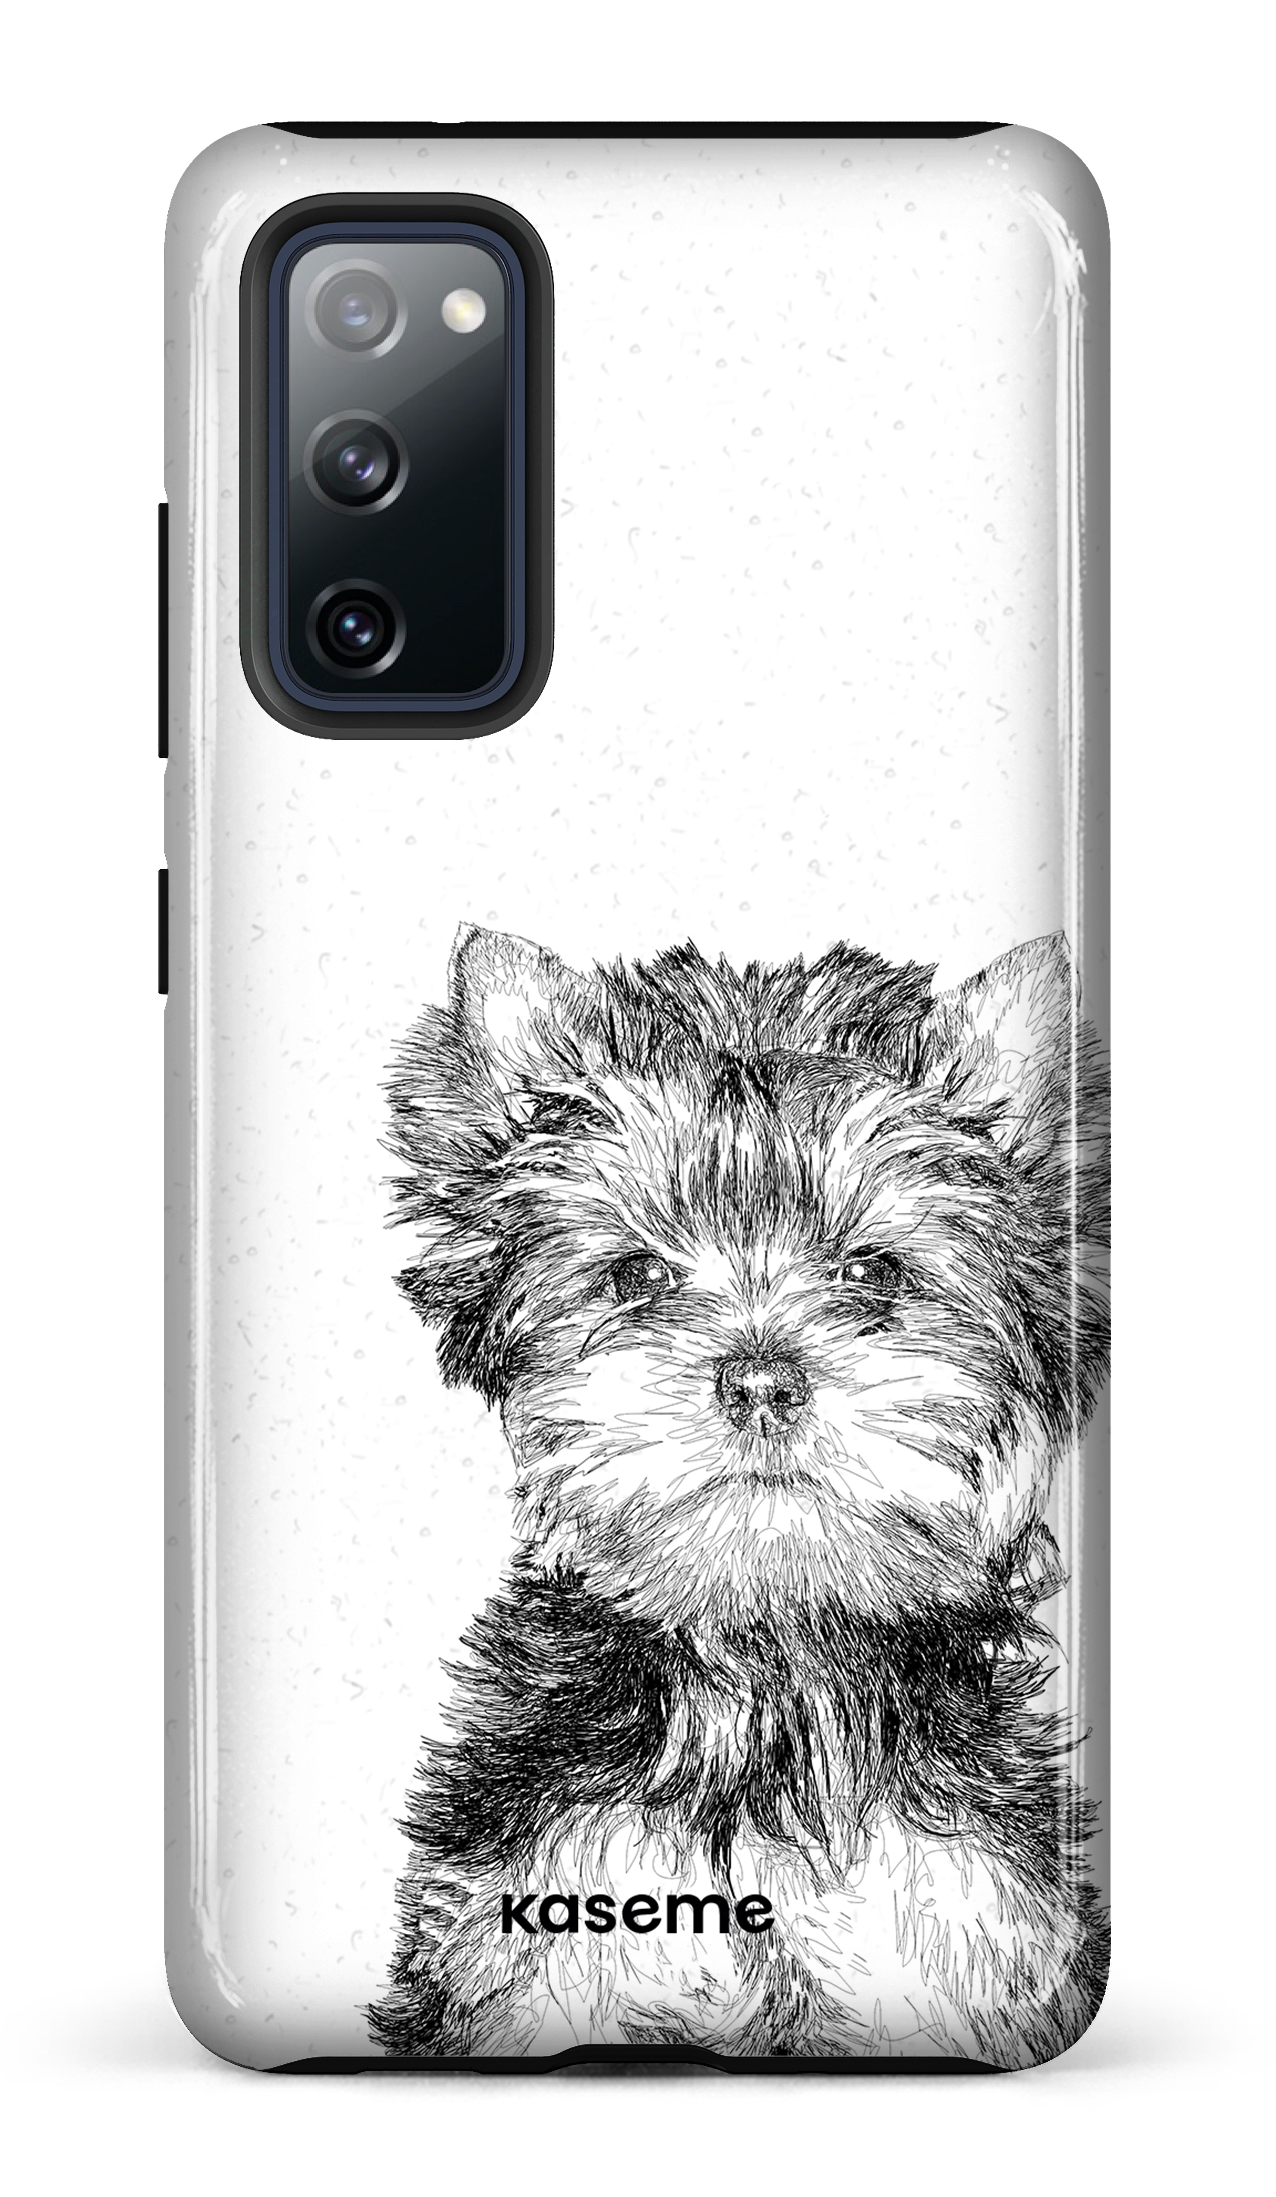 Yorkshire Terrier - Galaxy S20 FE